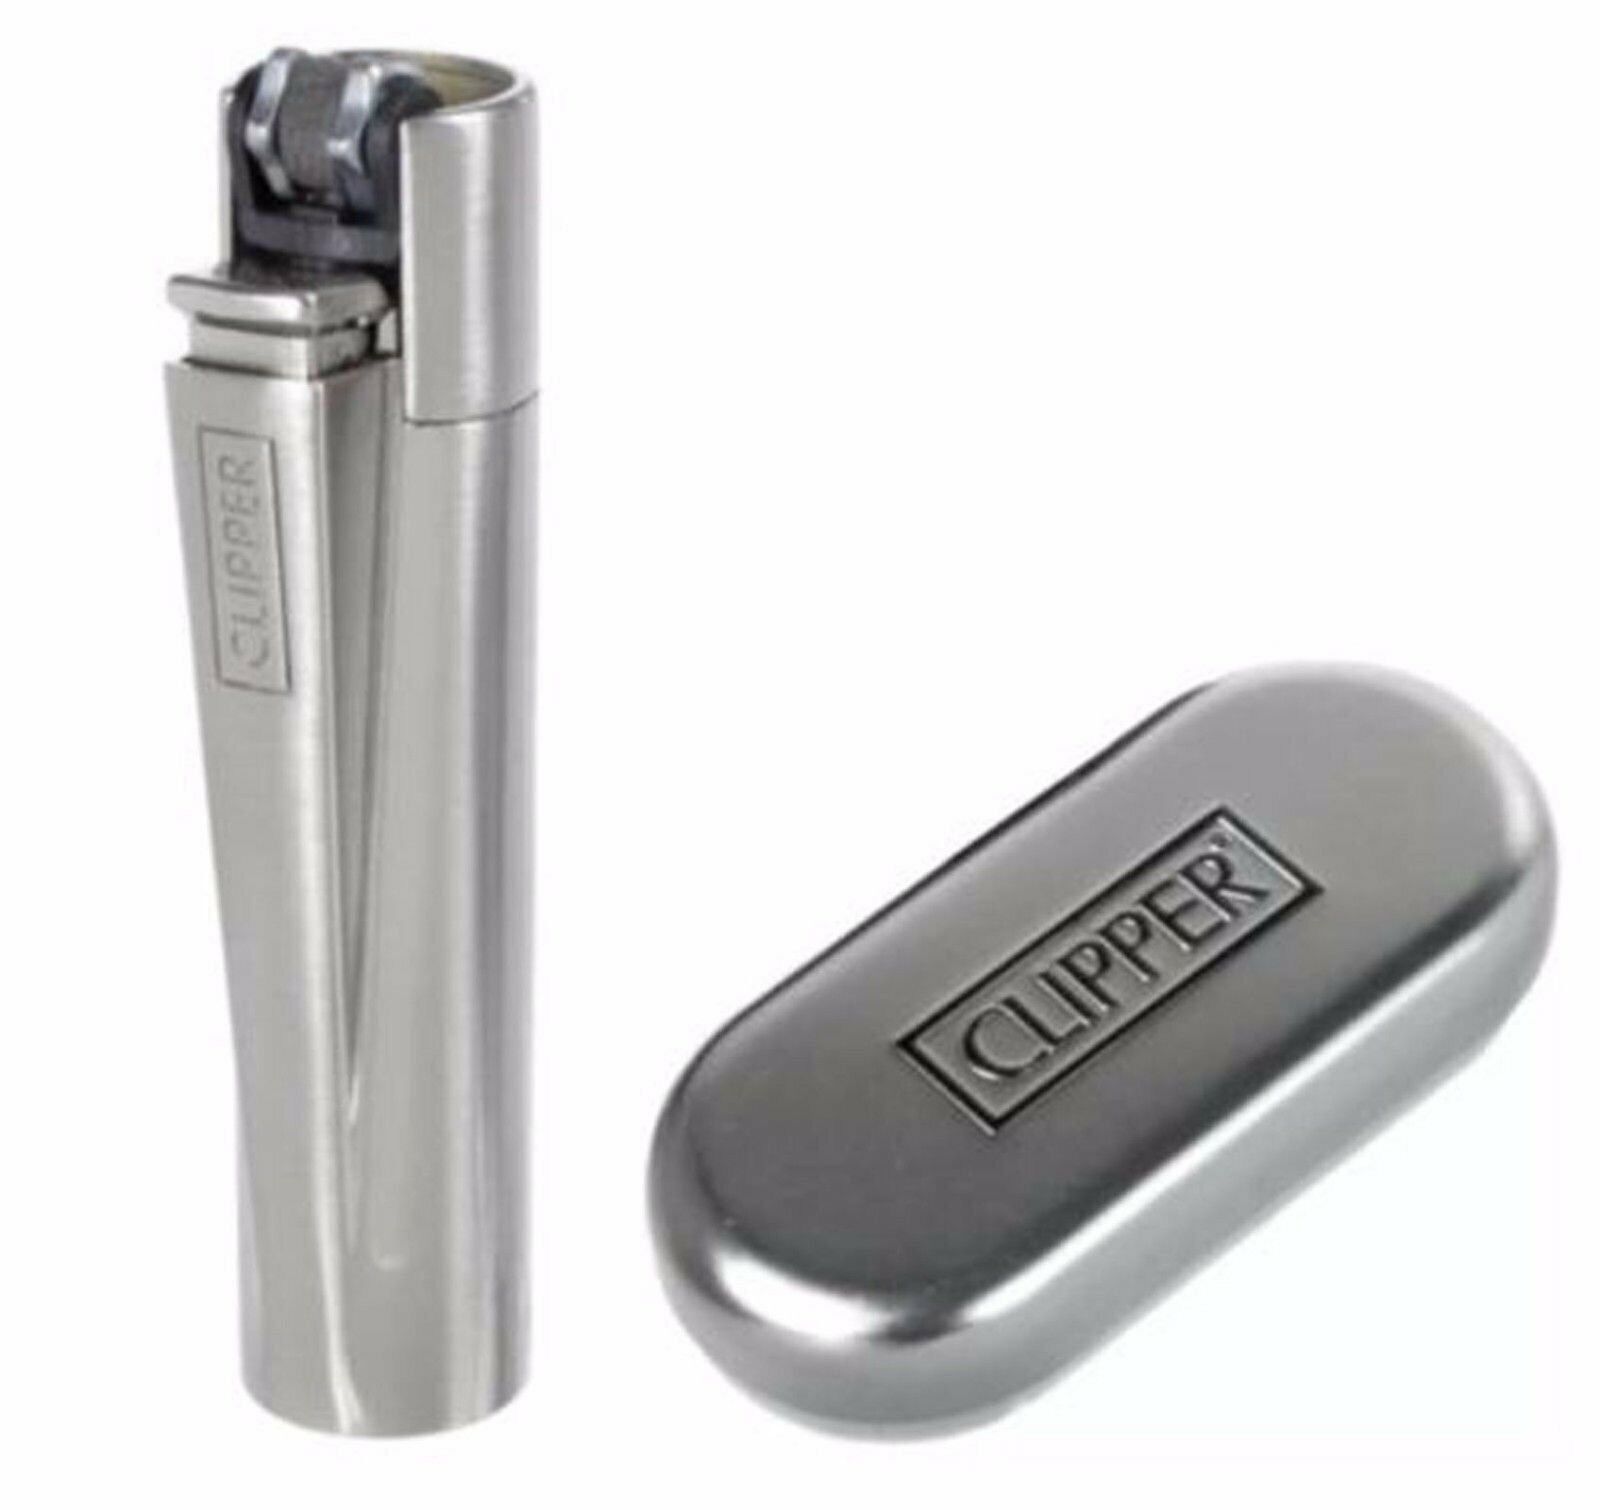 1 x Clipper Silver Full Size Refillable Metal Lighter Brushed Or Shiny